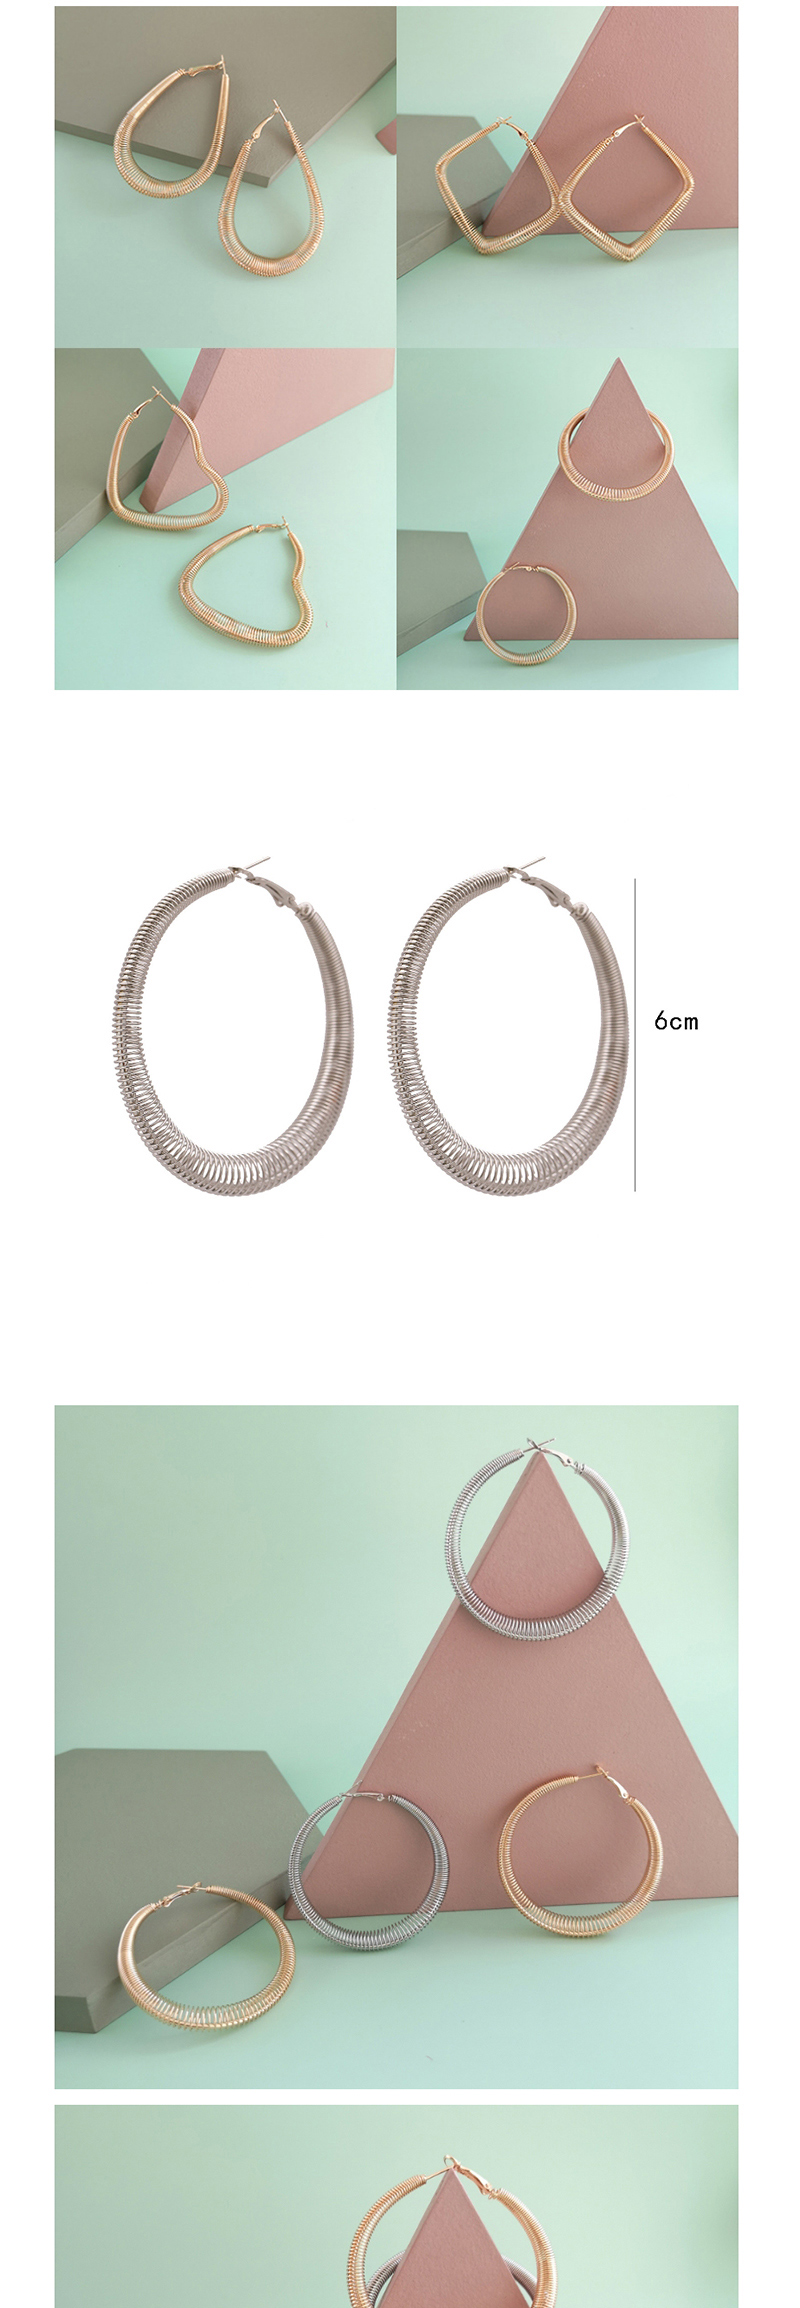 Fashion Round + Gold Alloy Geometric Spring Studs,Hoop Earrings